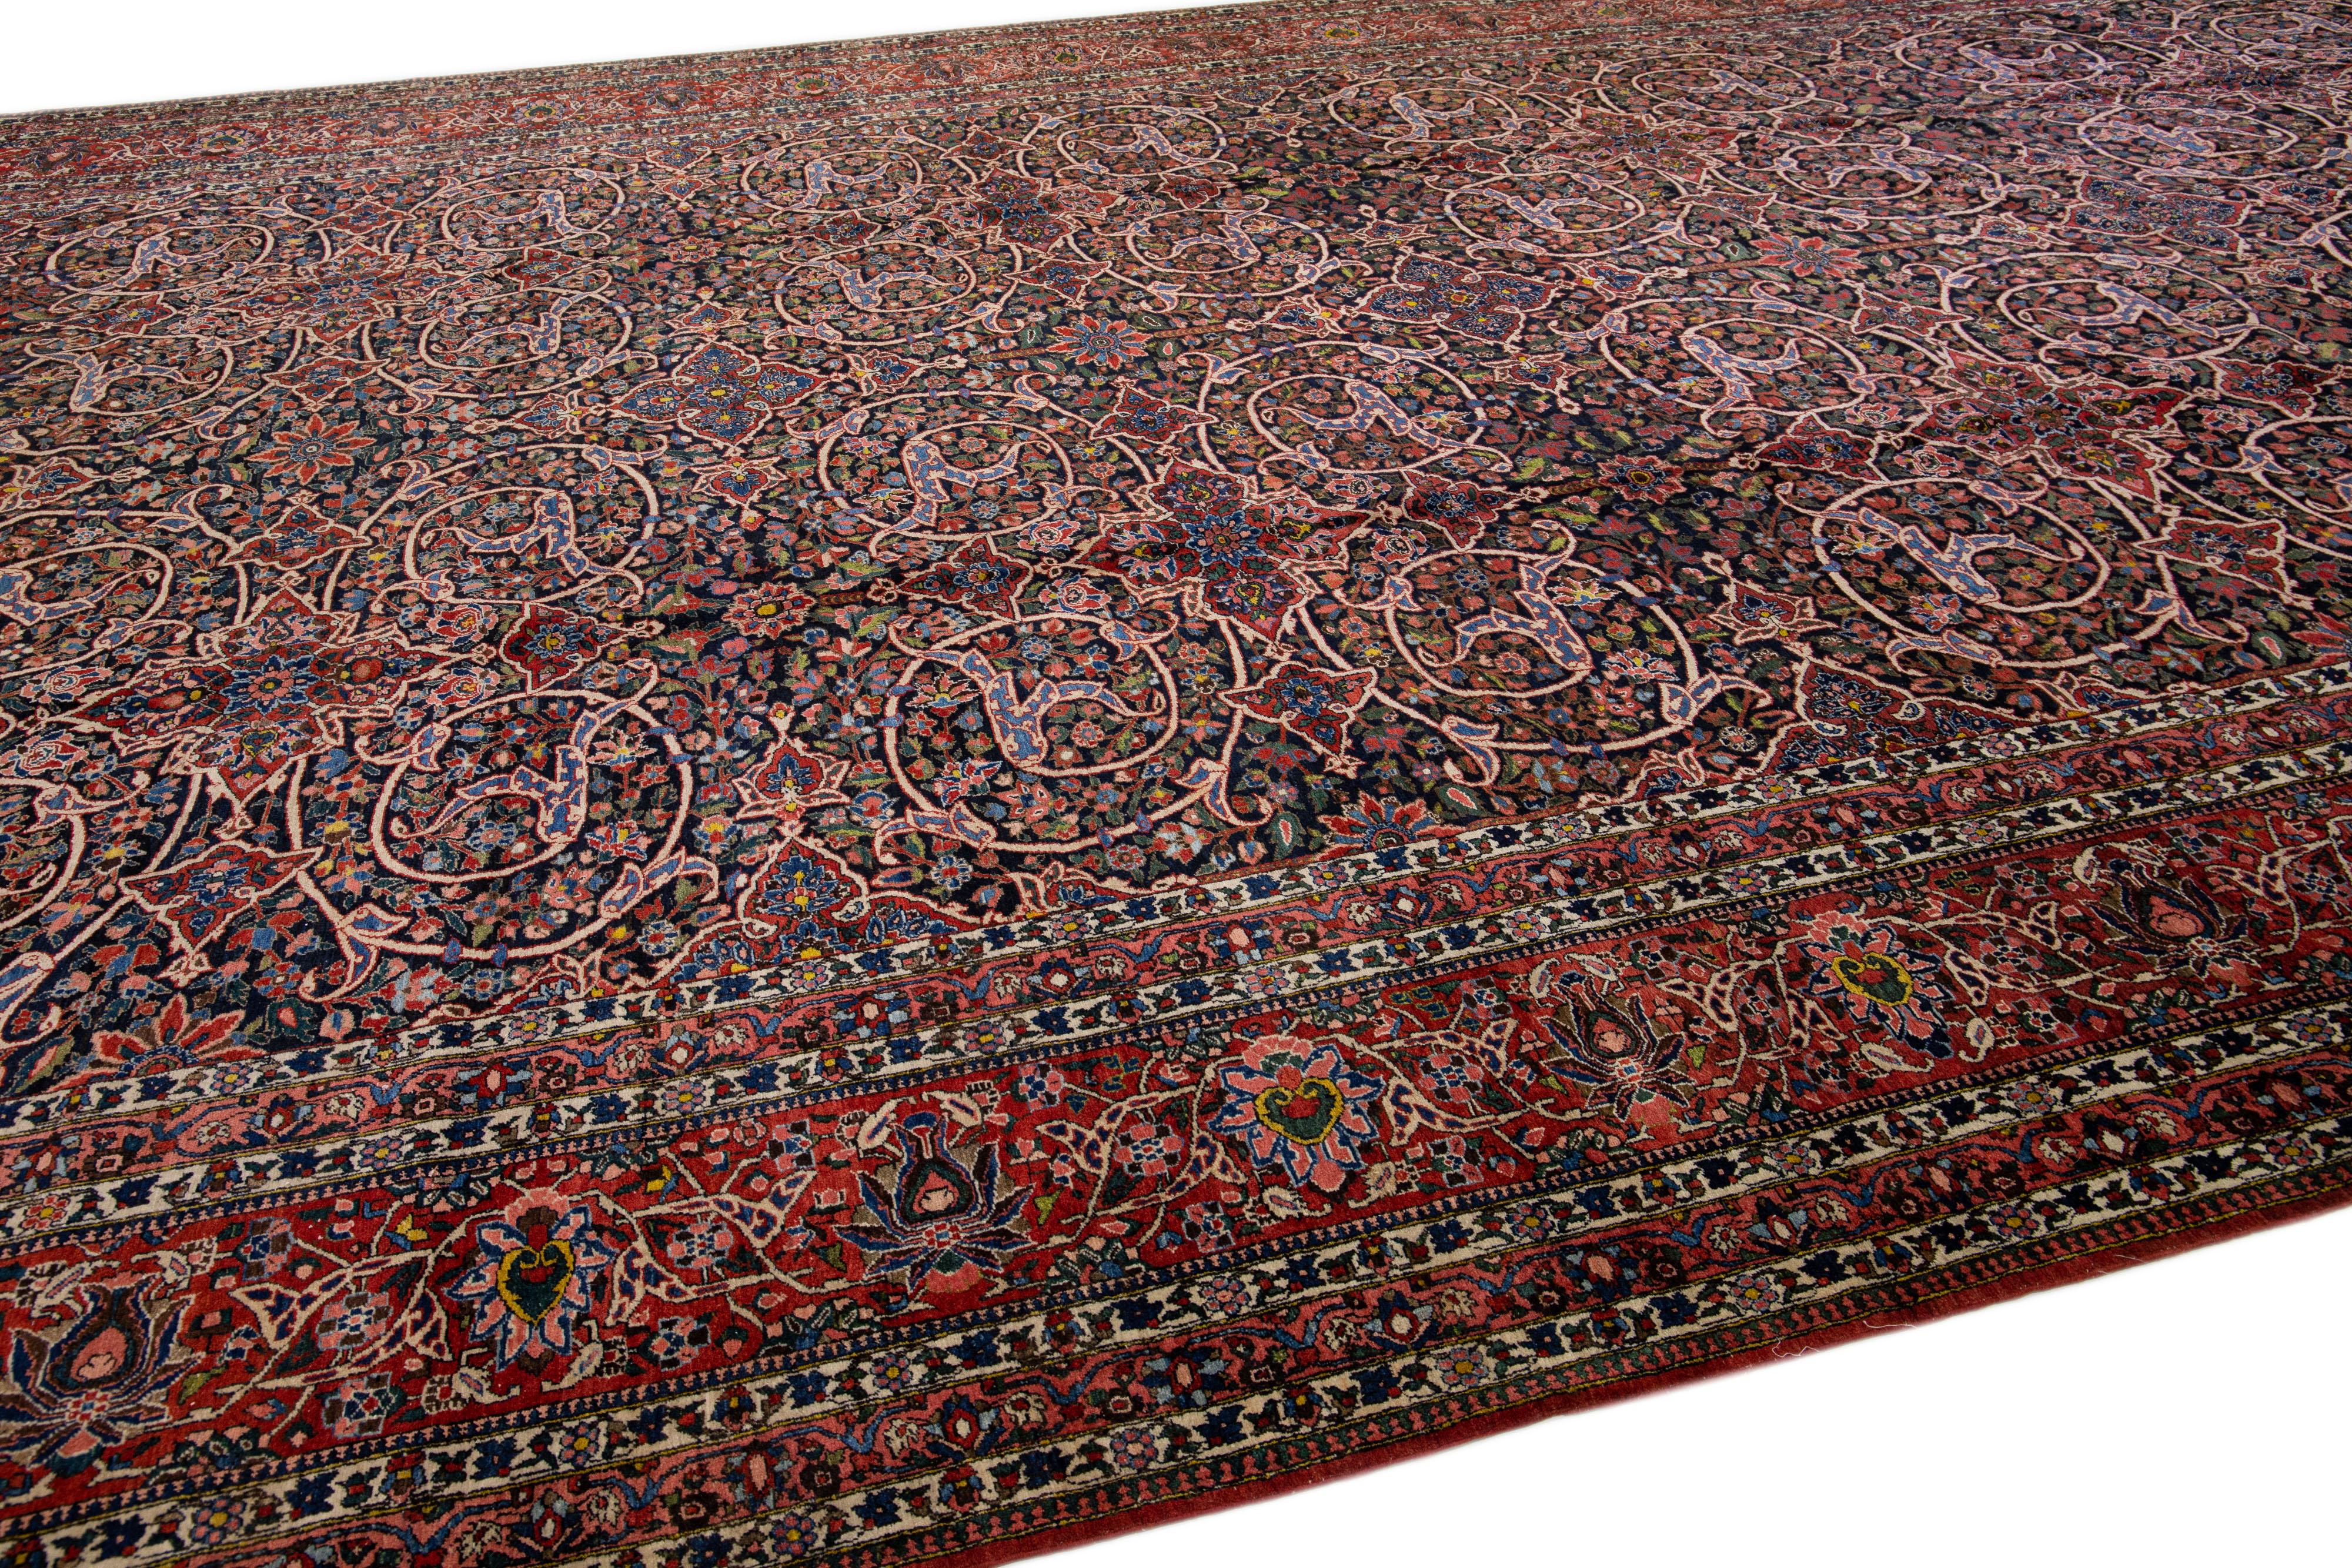 Antique Bakhtiari Persian Handmade Red & Blue Wool Rug With Floral Pattern In Good Condition For Sale In Norwalk, CT